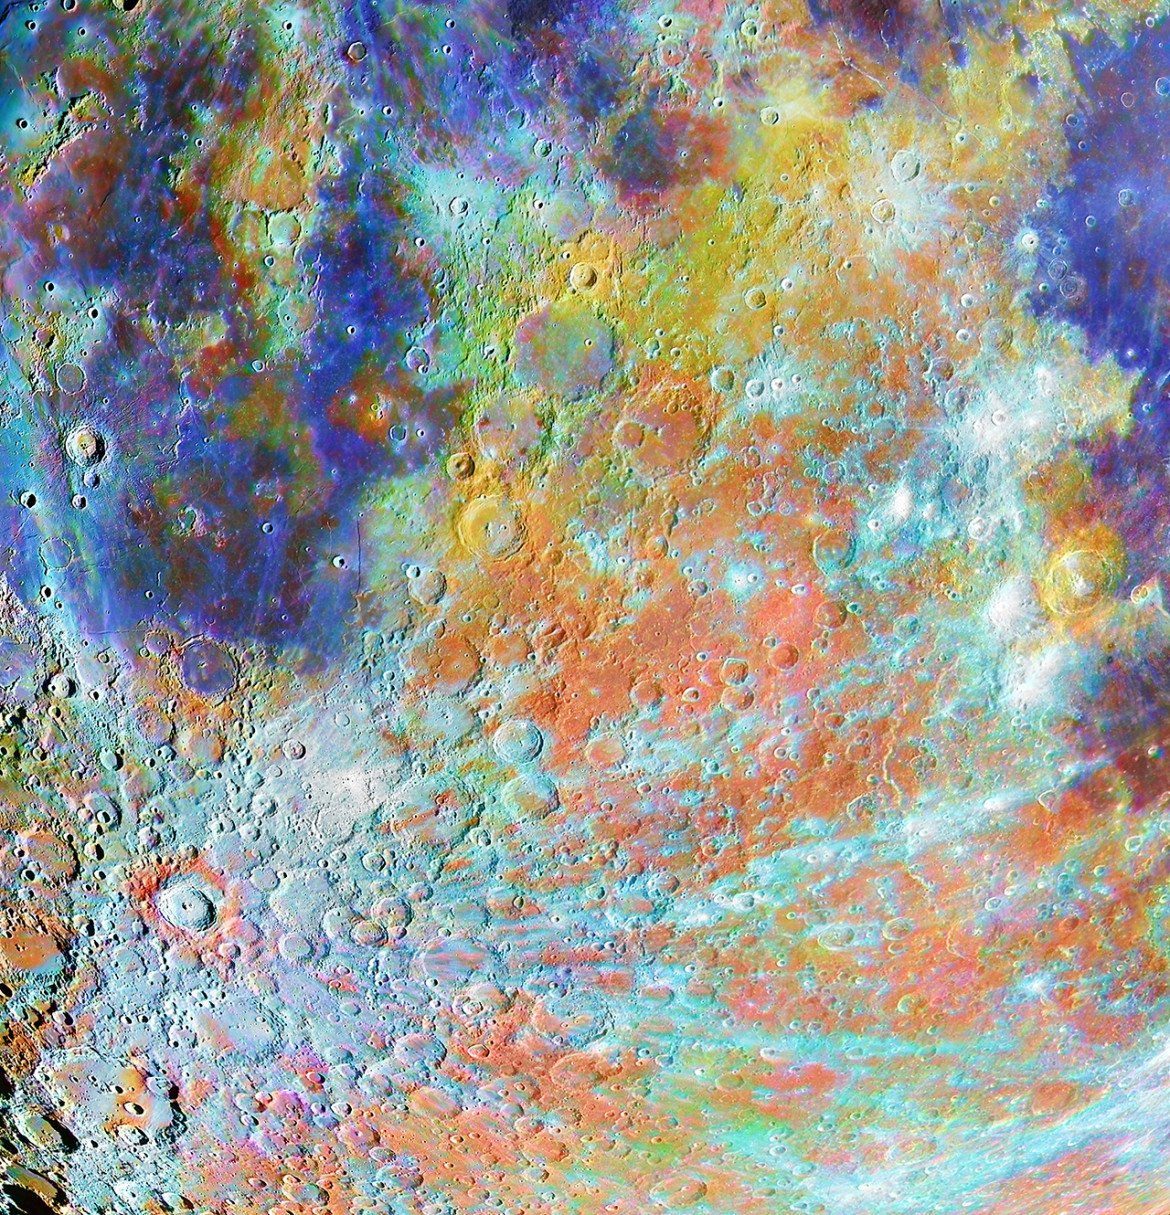 fot. Alain Paillou, "Tycho Crater Region with Colours", 1. miejsce w kat. Our Moon / Insight Investment Astronomy Photographer of the Year 2020